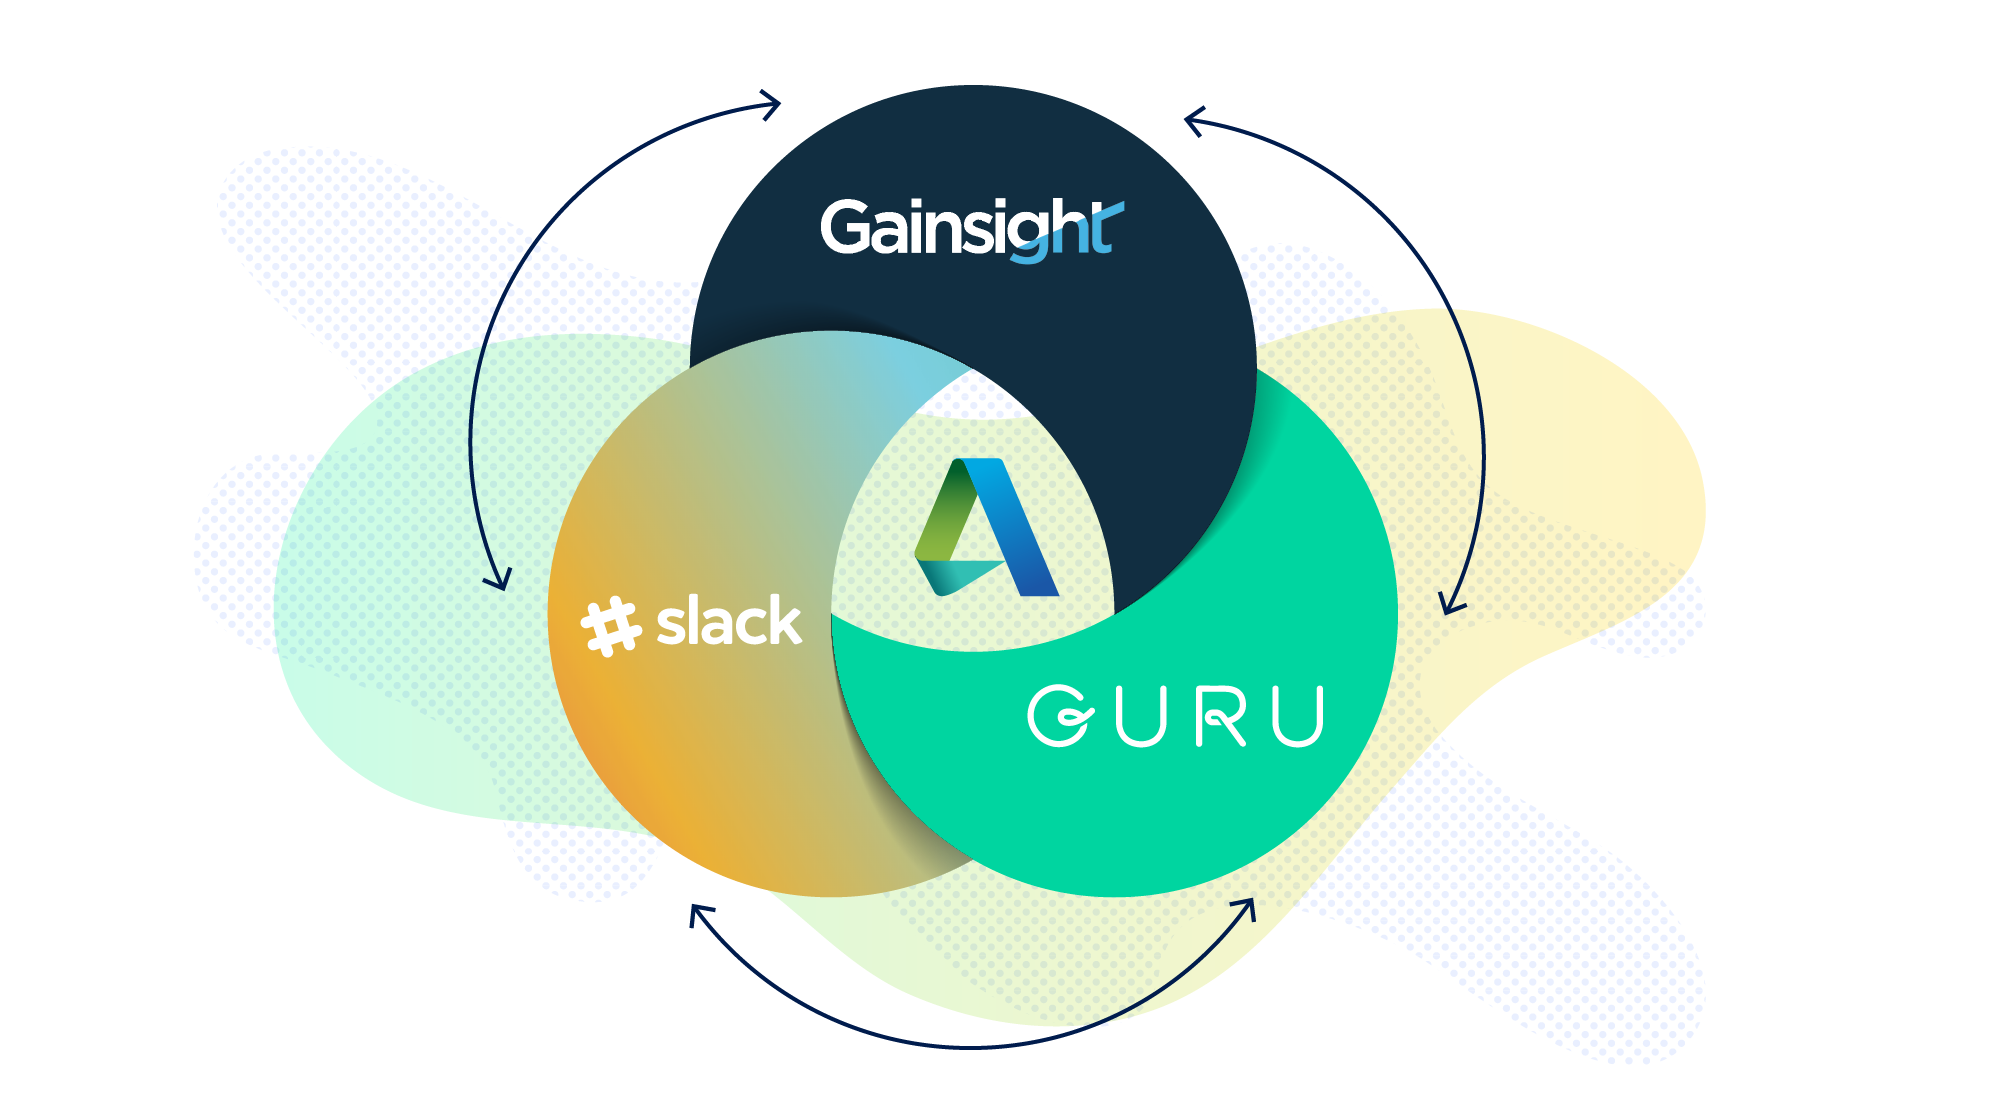 How Autodesk Works with Slack, Guru, and Gainsight